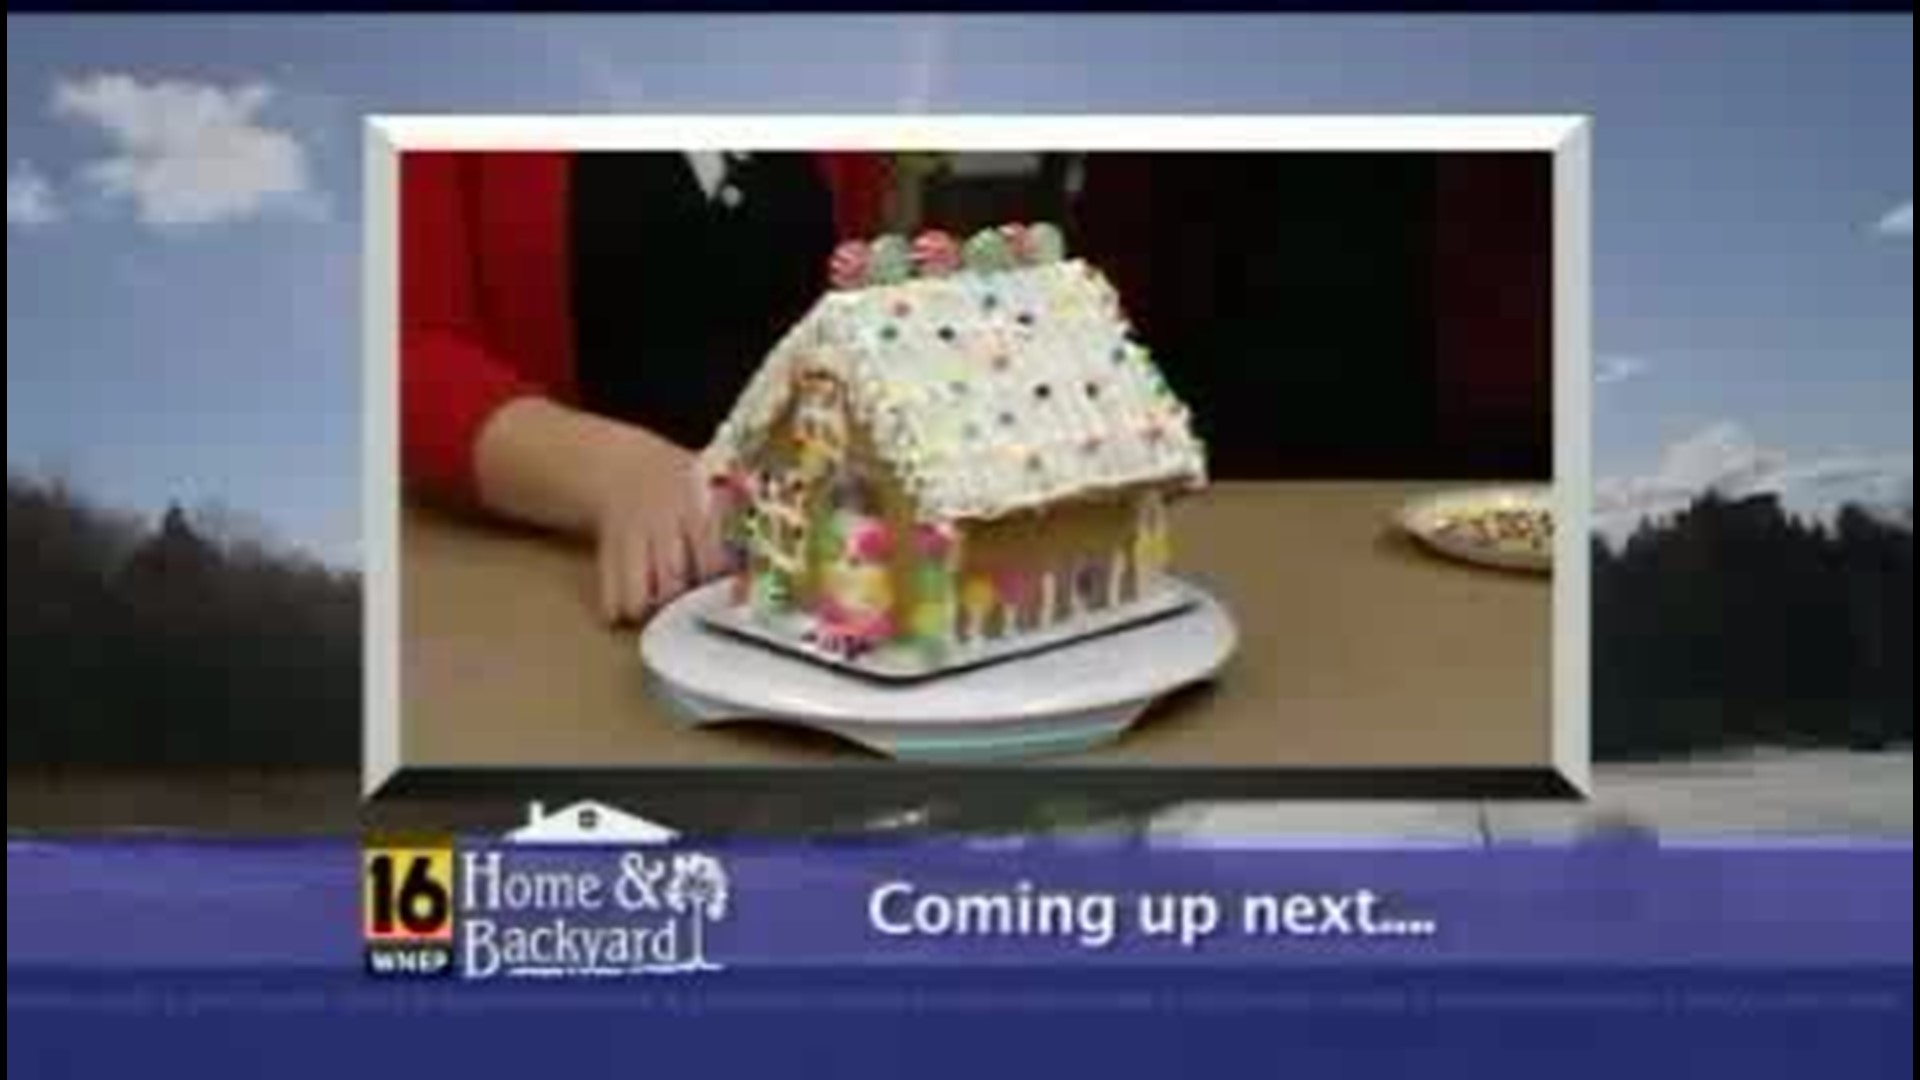 41+ Wnep Com Home And Backyard Images - HomeLooker